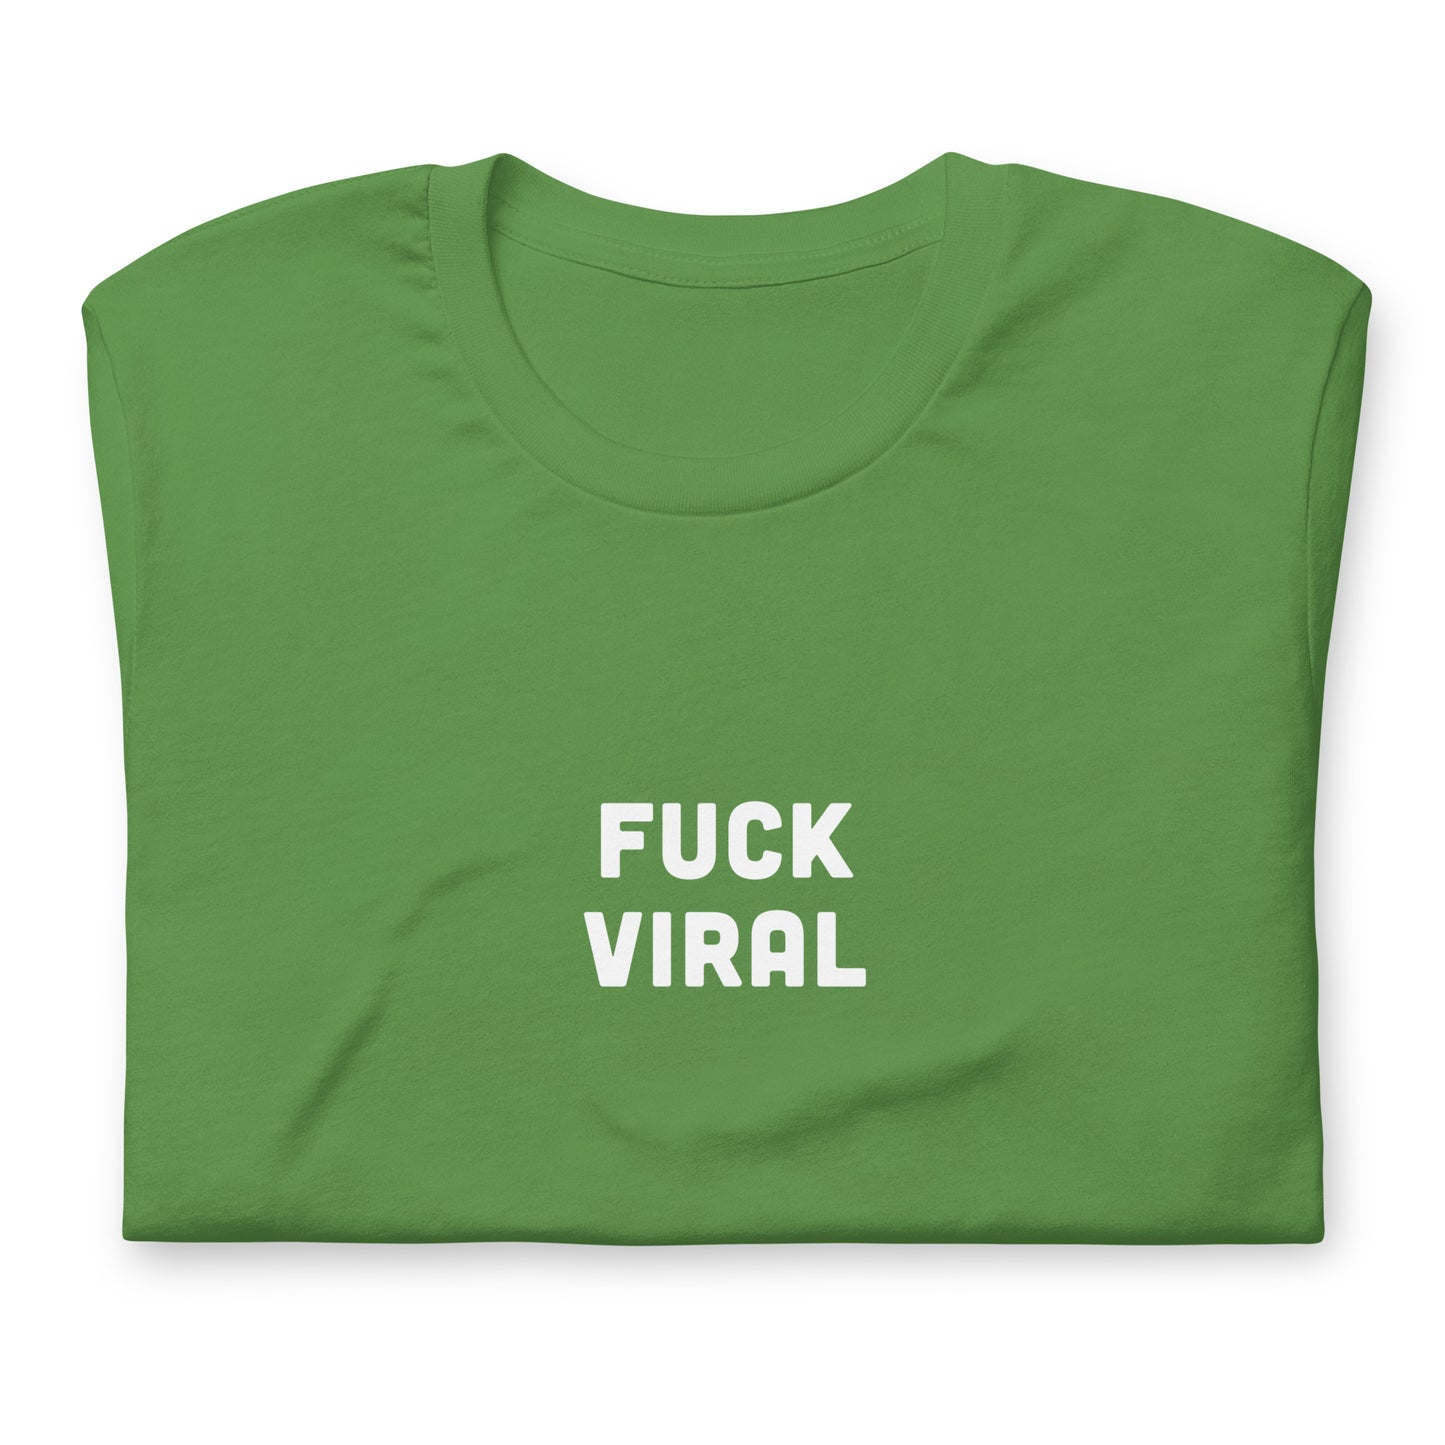 Fuck Viral T-Shirt Size 2XL Color Navy